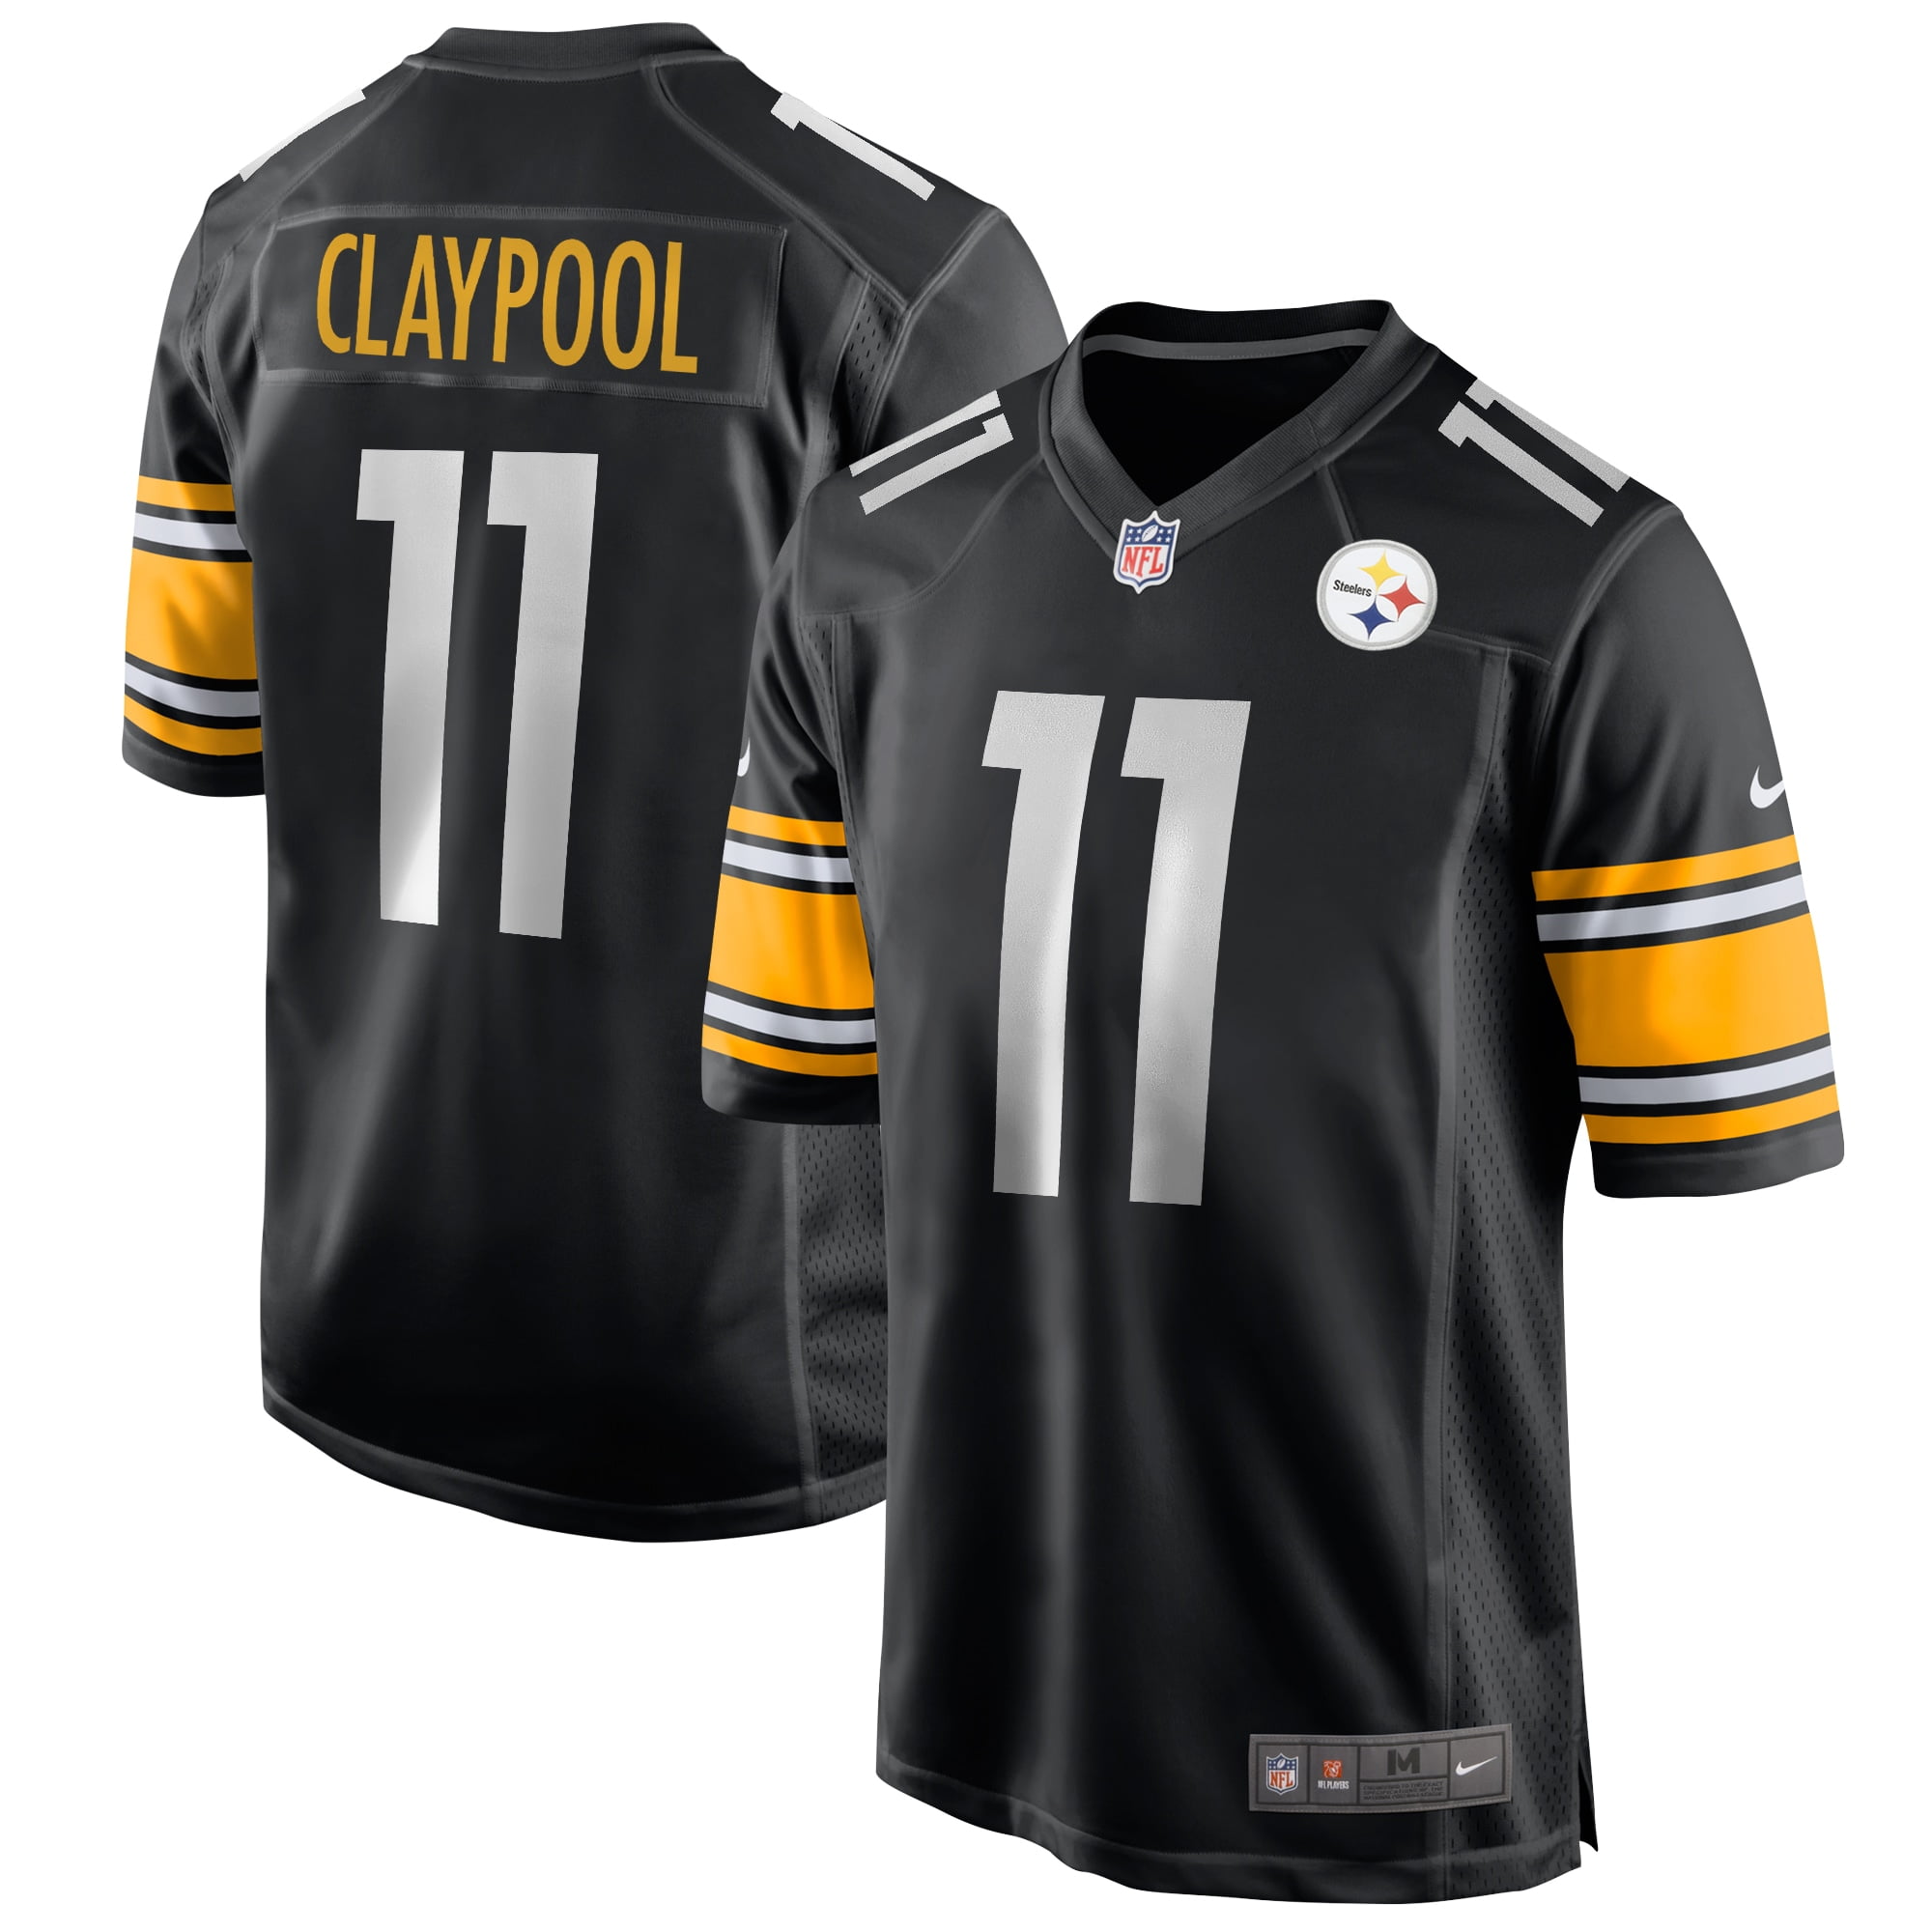 youth steelers jersey